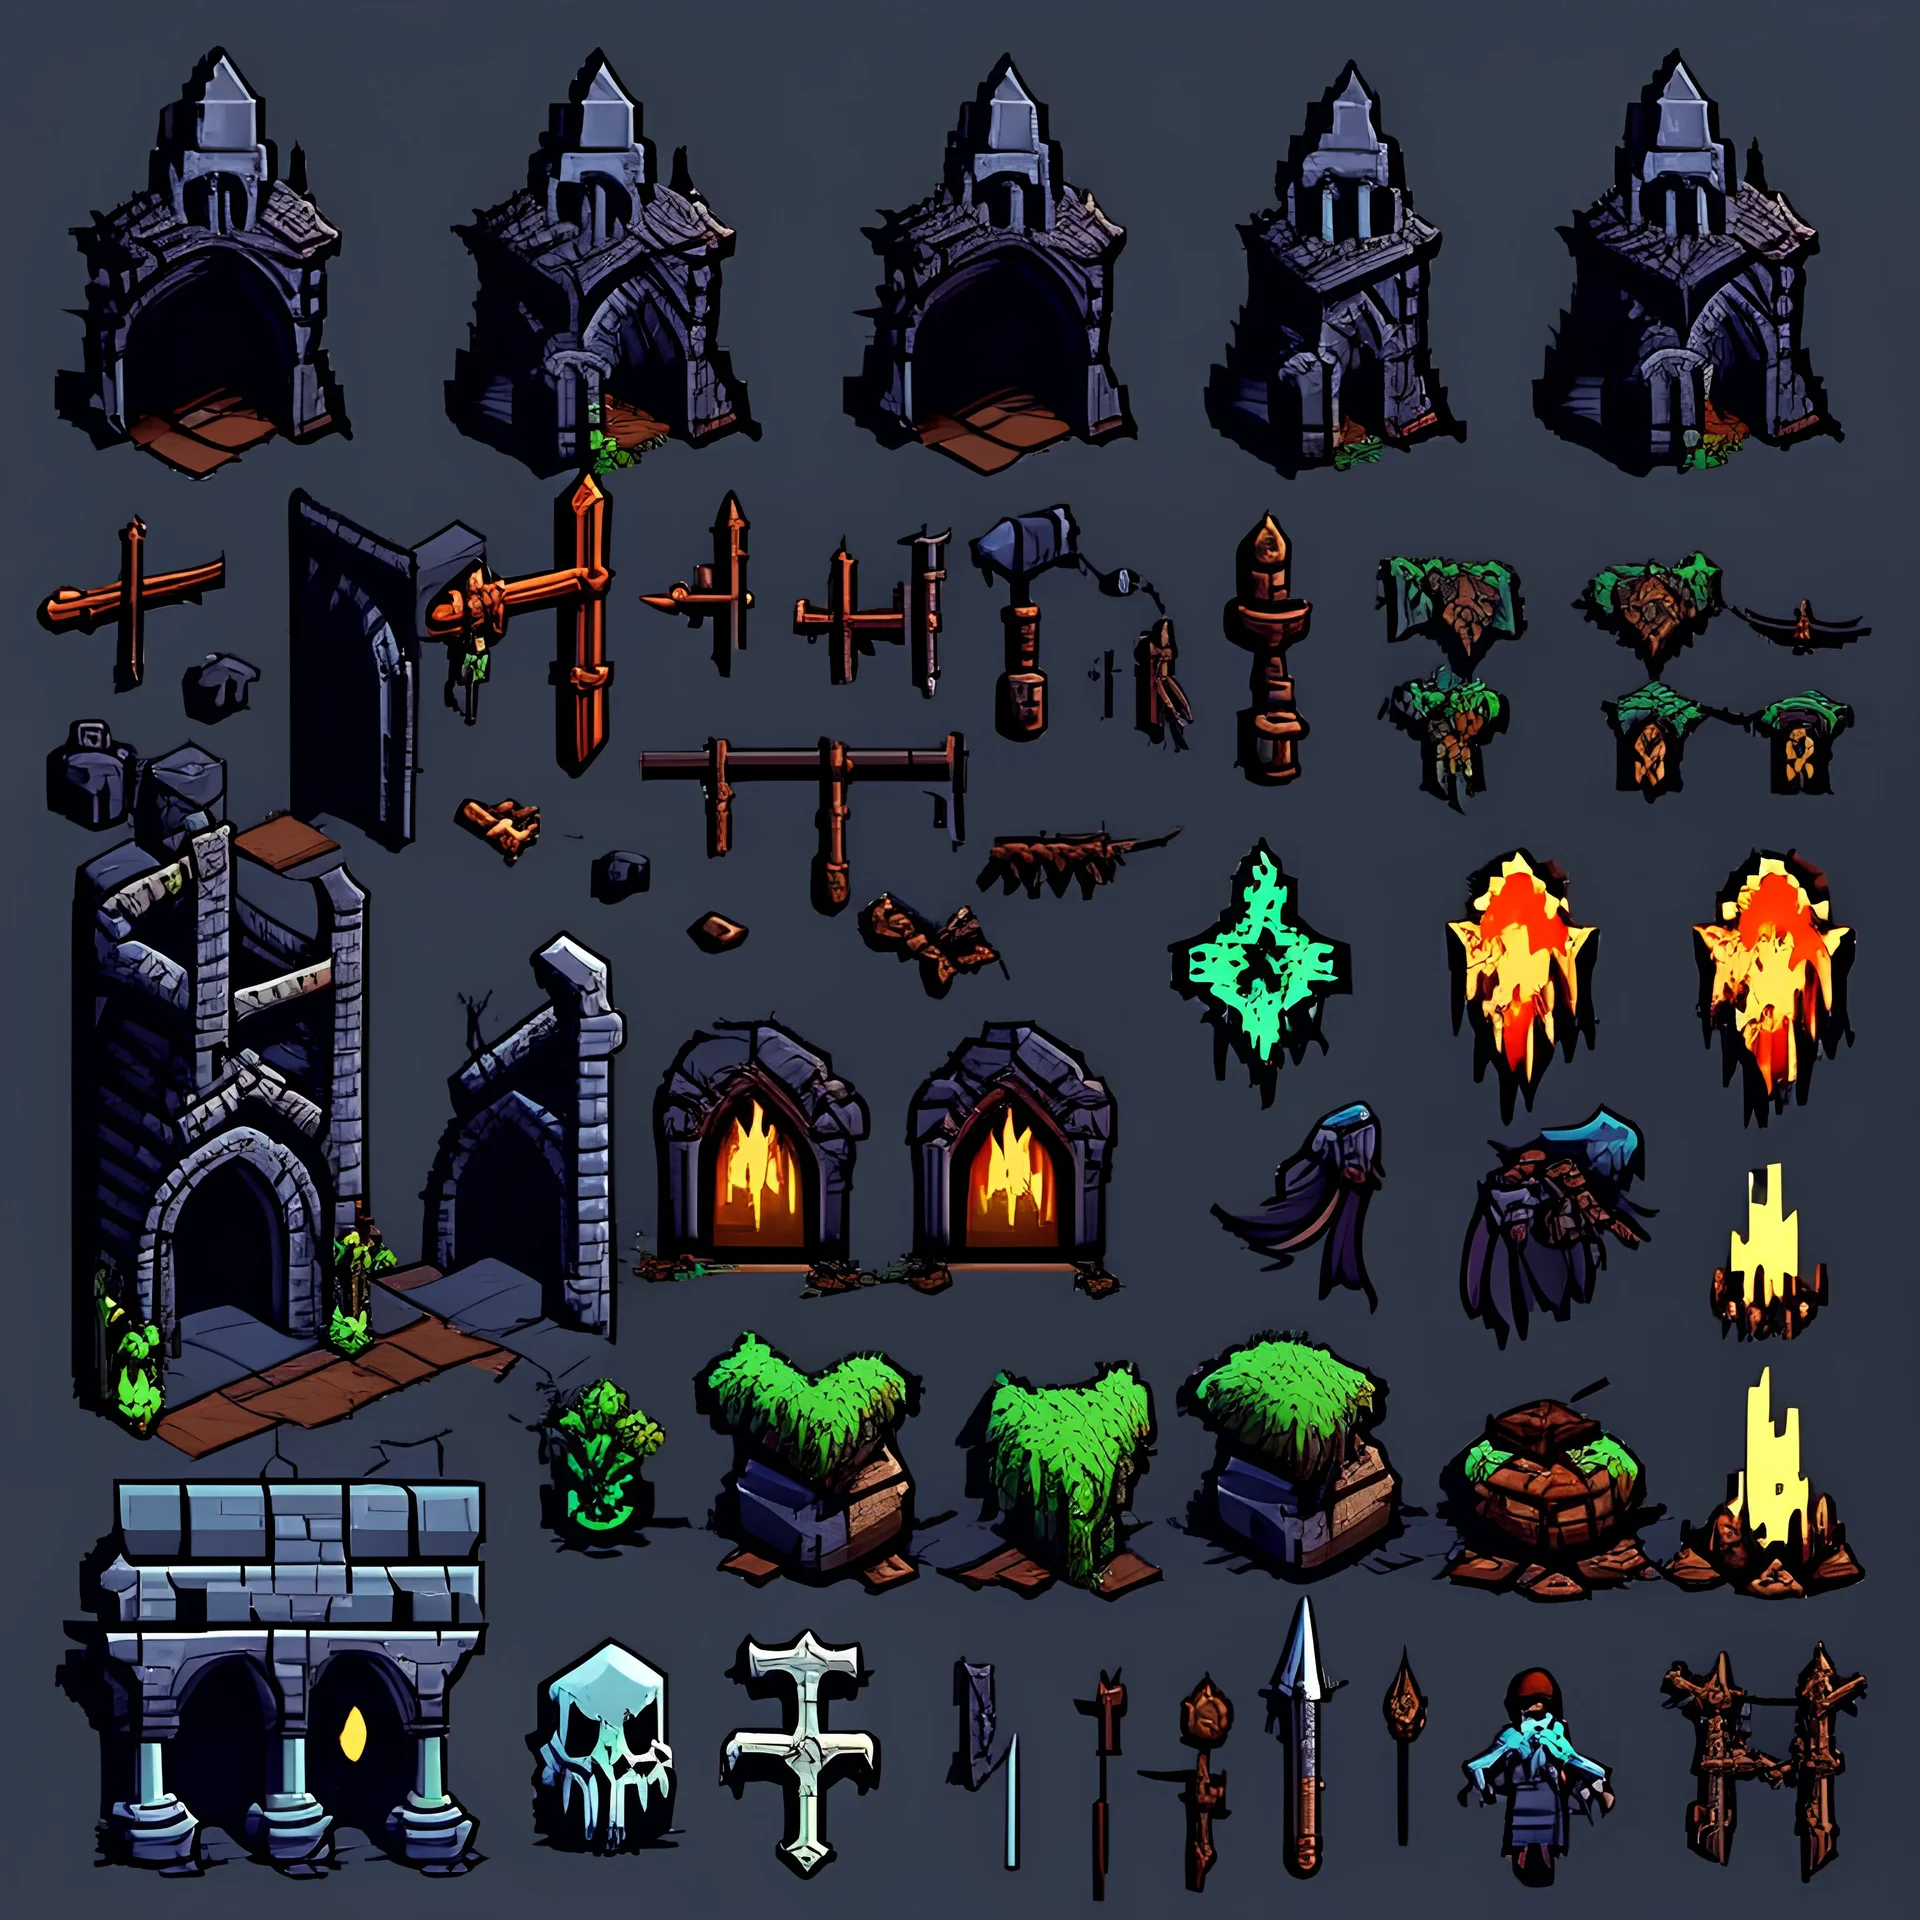 sprite sheet, rpg maker 2D art, top down assets for a post-apocalyptic dungeon crawler, underground, churches, fighting demons